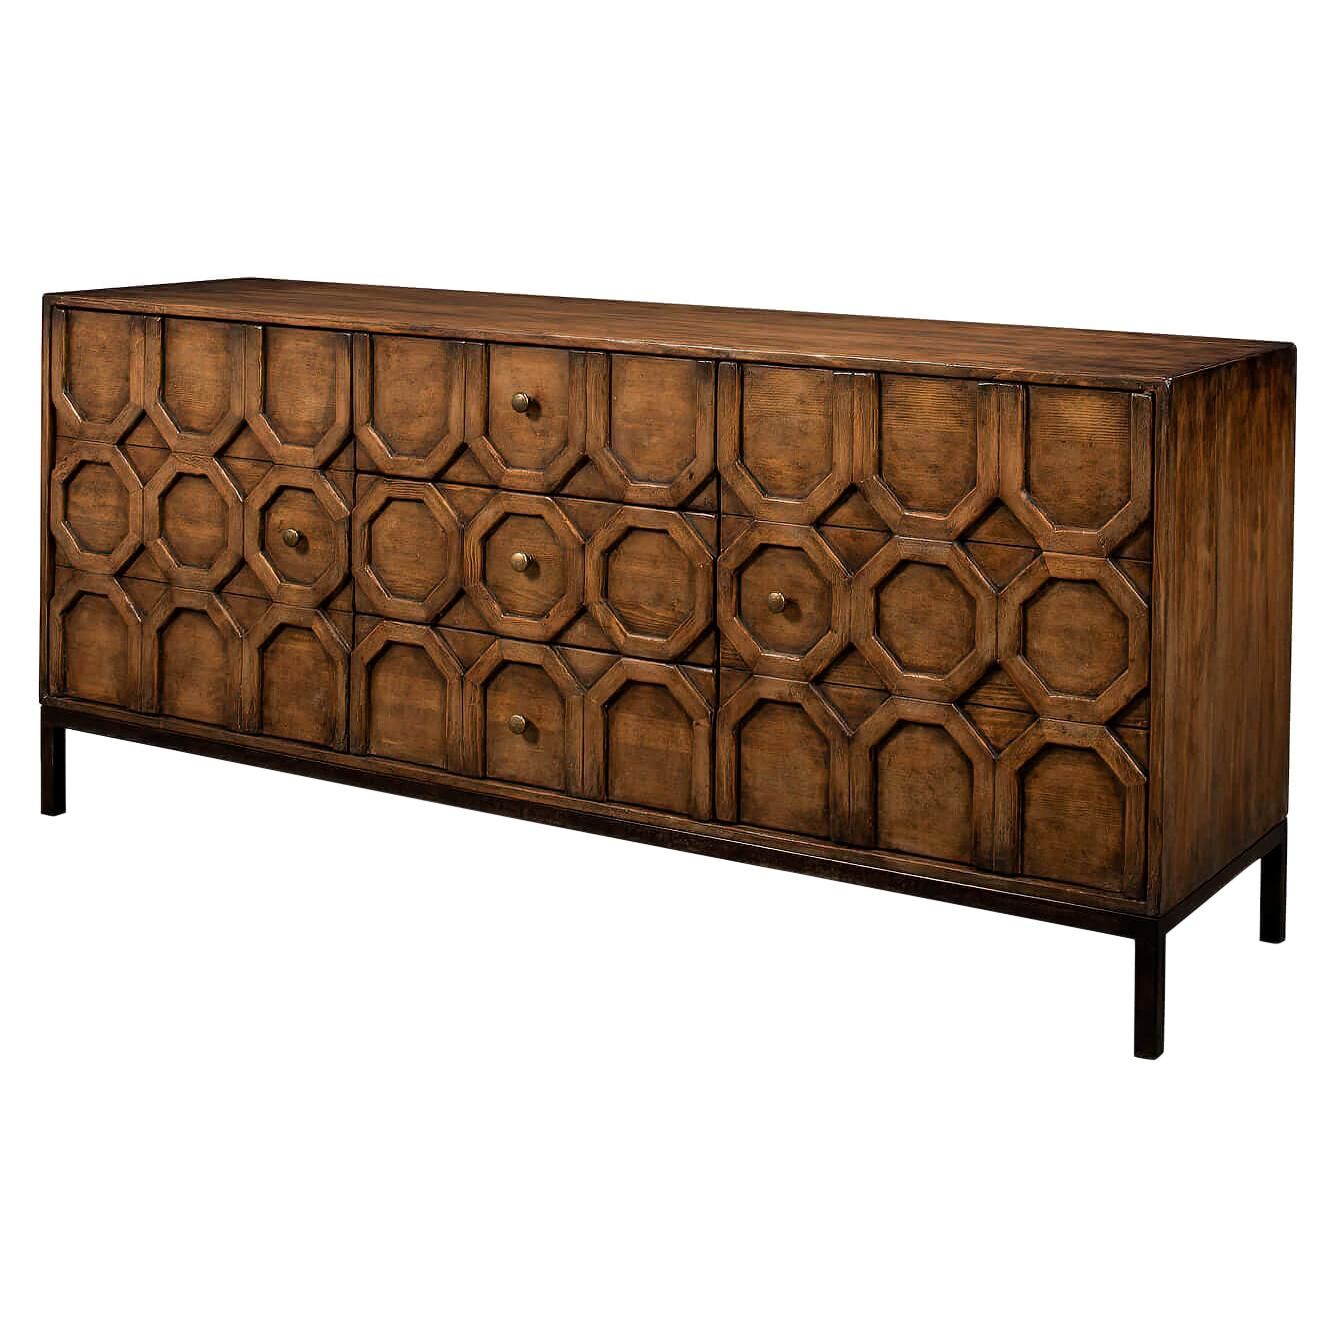 Modern Geometric Sideboard For Sale At 1stdibs | Geometric Buffet Cabinet, Sideboard  Geometric, Modern Sideboard With Regard To 2017 Geometric Sideboards (Photo 5 of 15)